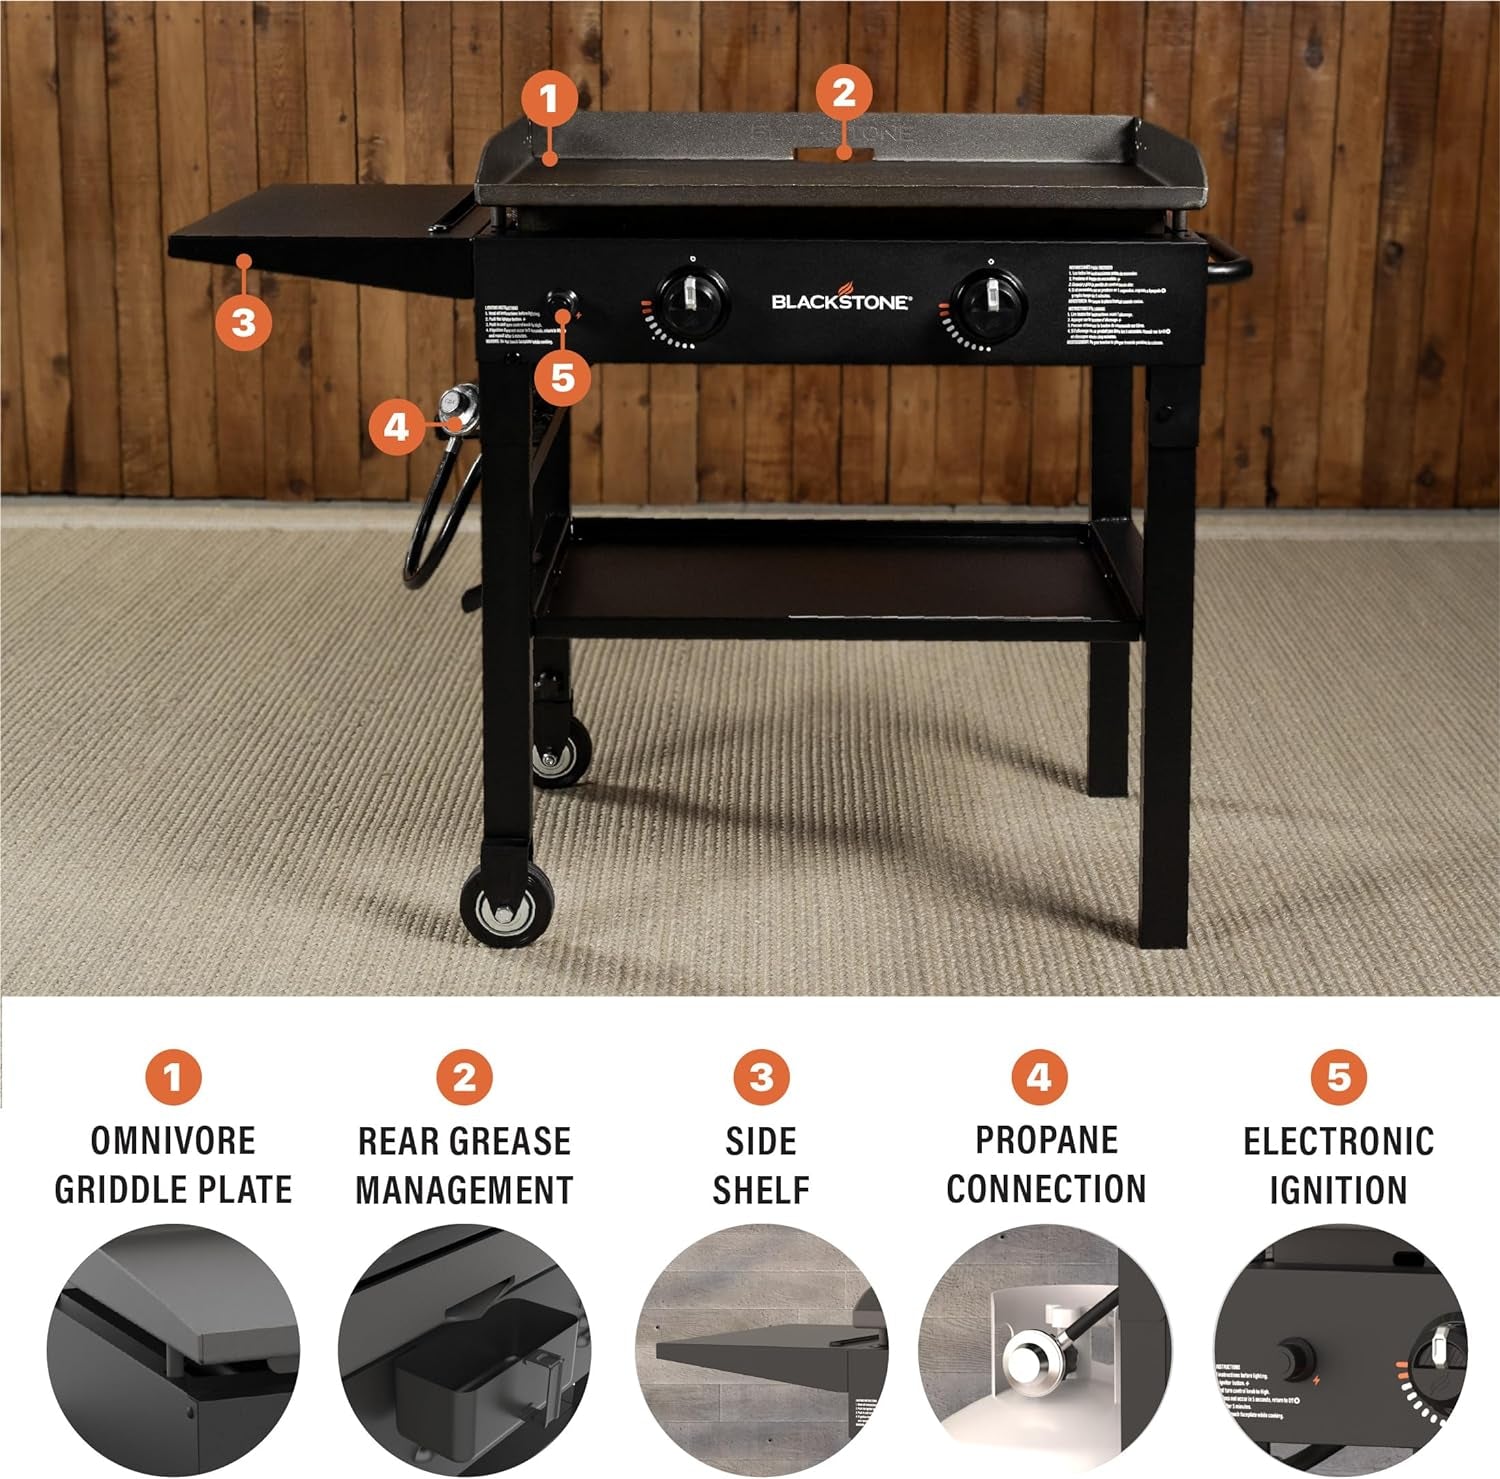 Flat Top Gas Grill Griddle 2 Burner Propane Fuelled Rear Grease Management System, 1517, Outdoor Griddle Station for Camping, 28 Inch